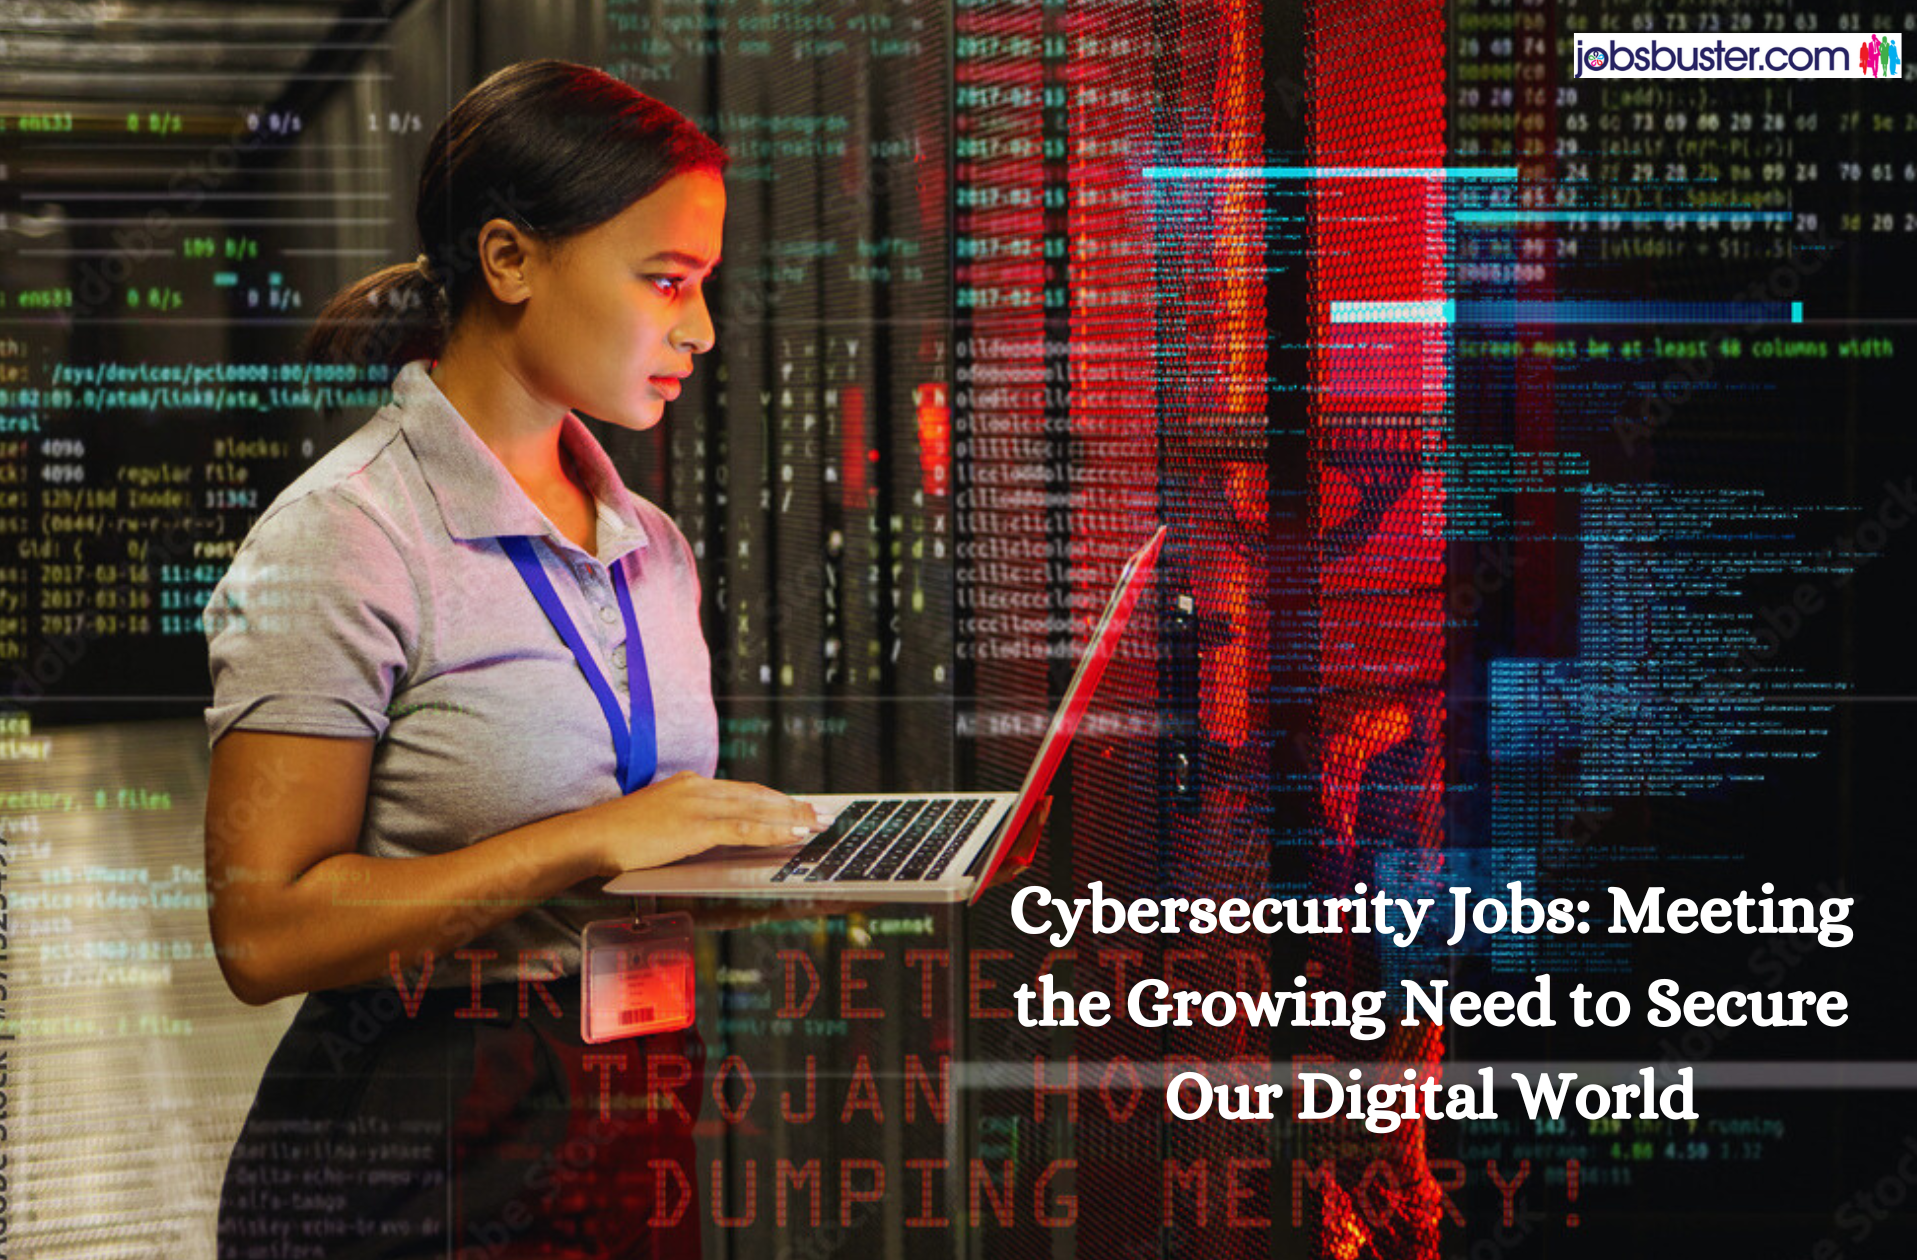 Cybersecurity Jobs: Meeting the Growing Need to Secure Our Digital World